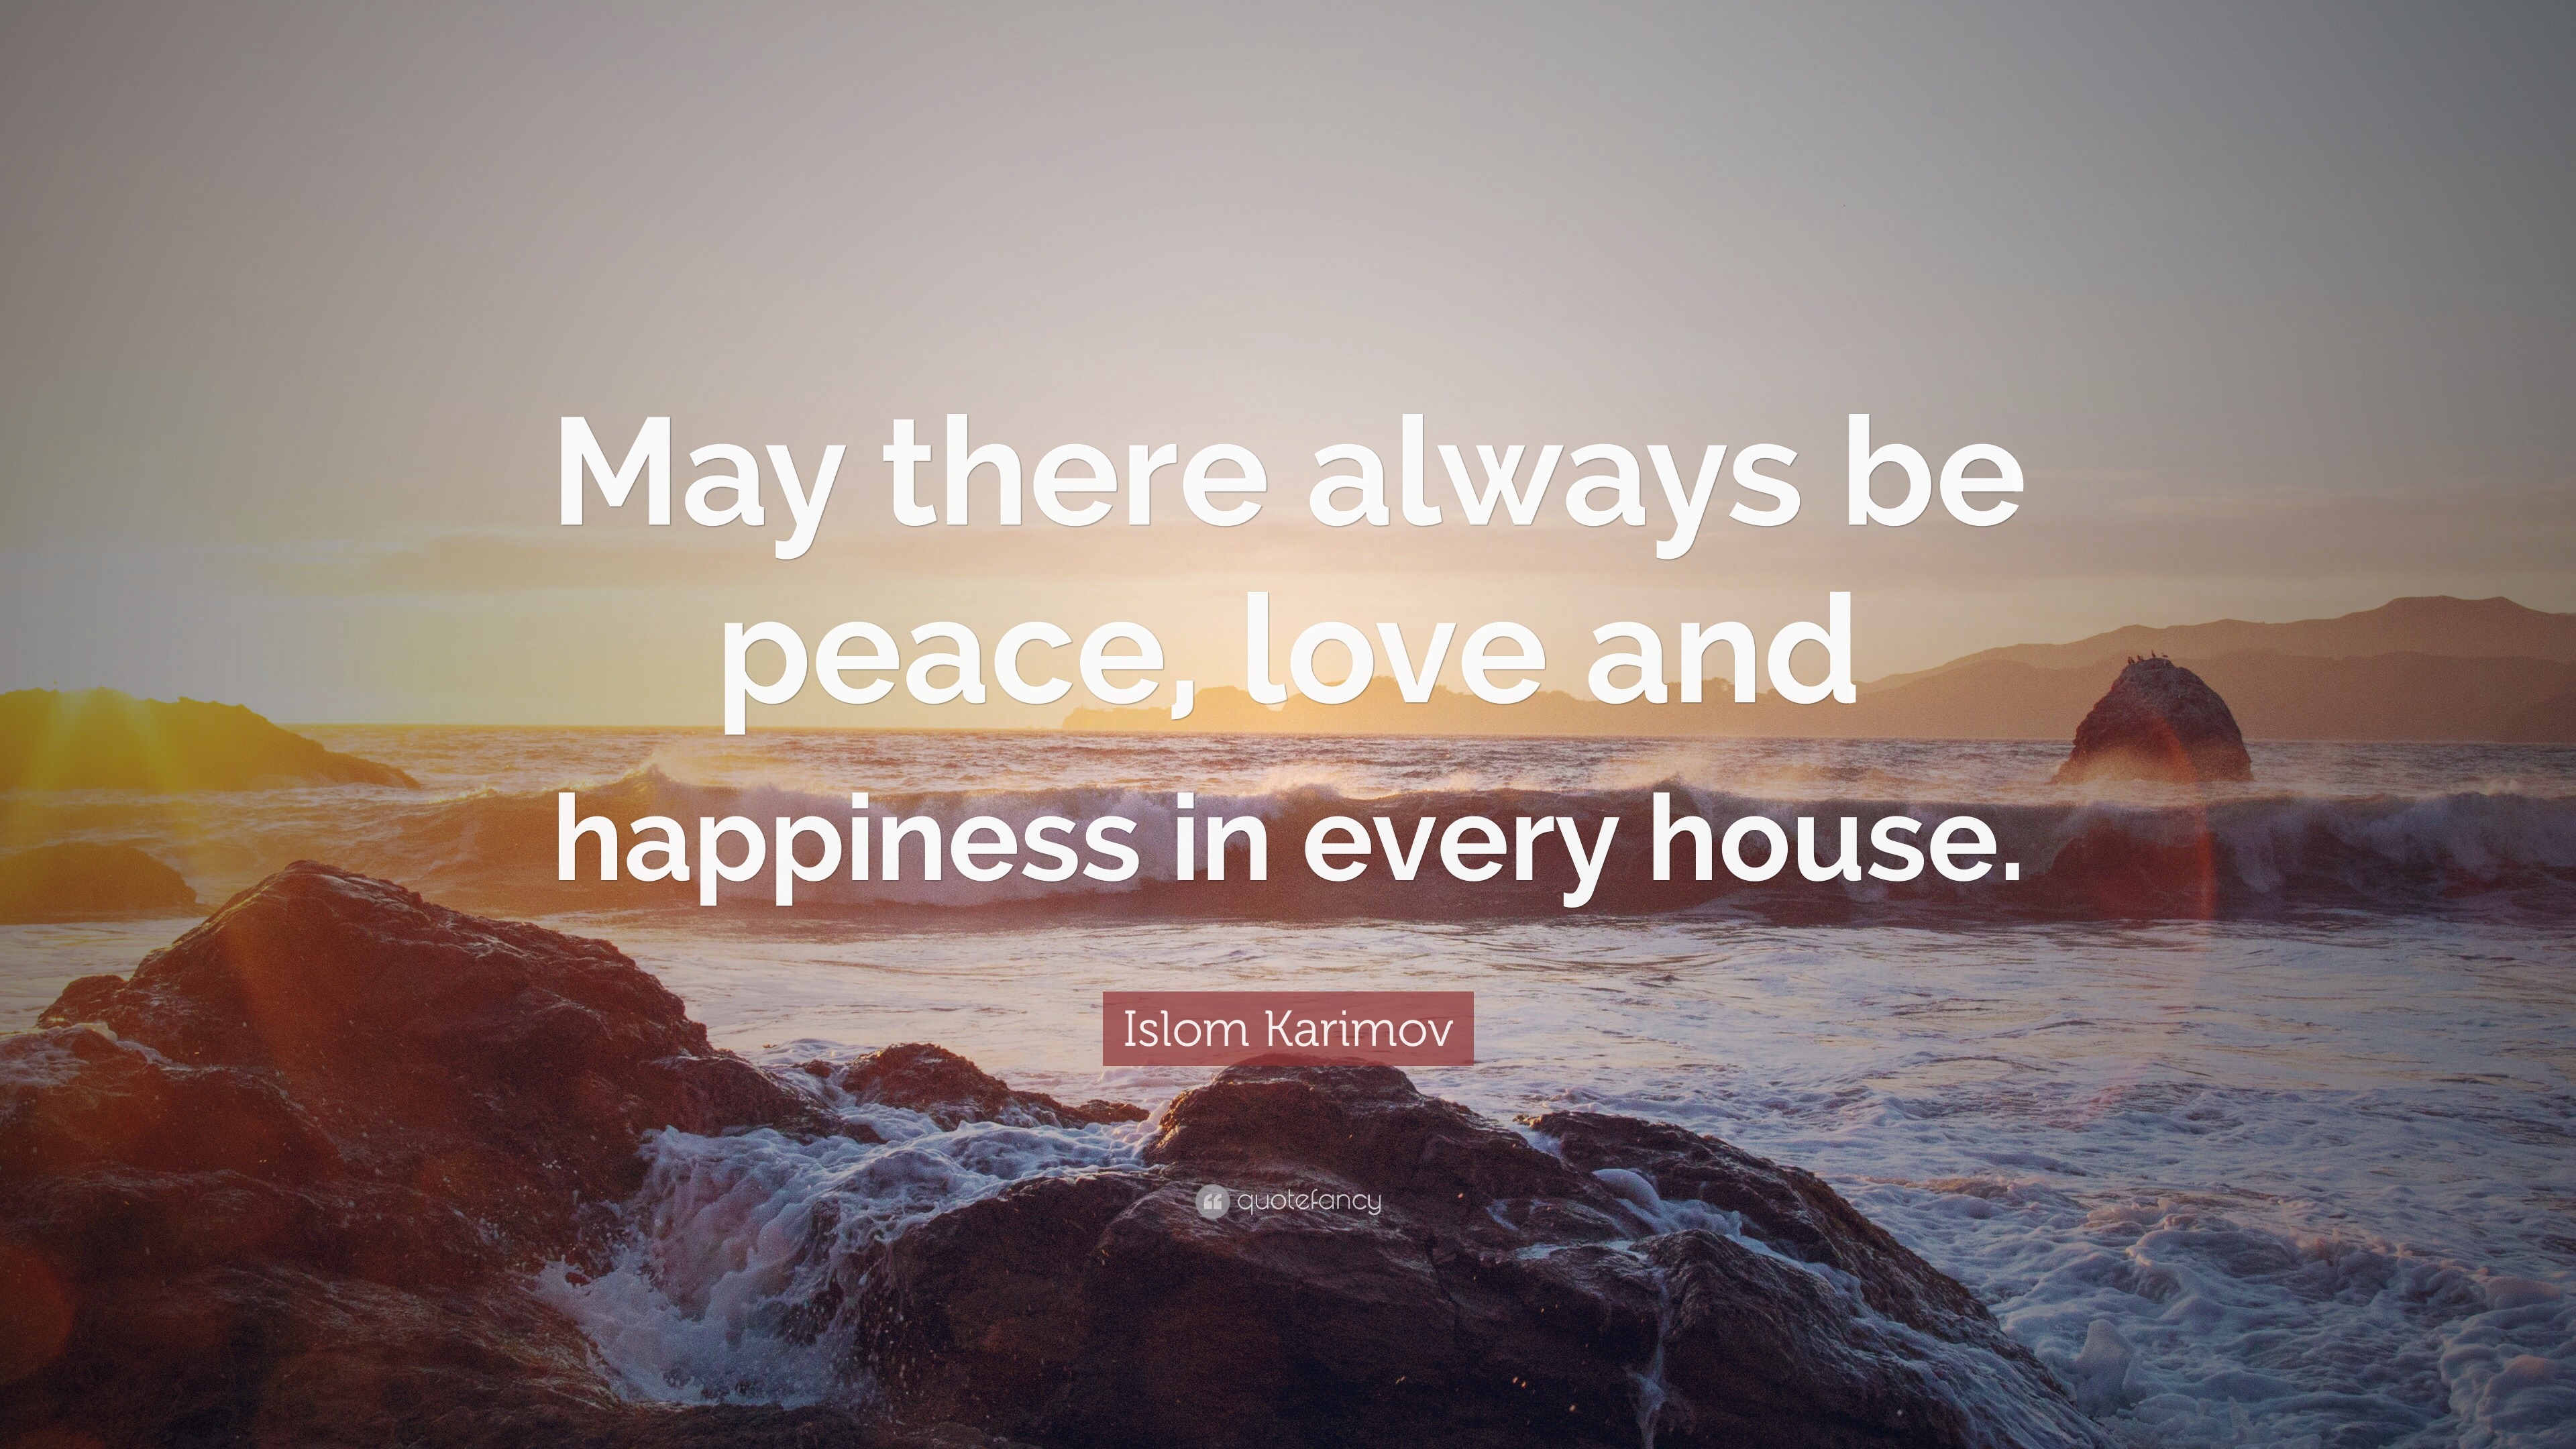 Islom Karimov Quote “May there always be peace love and happiness in every